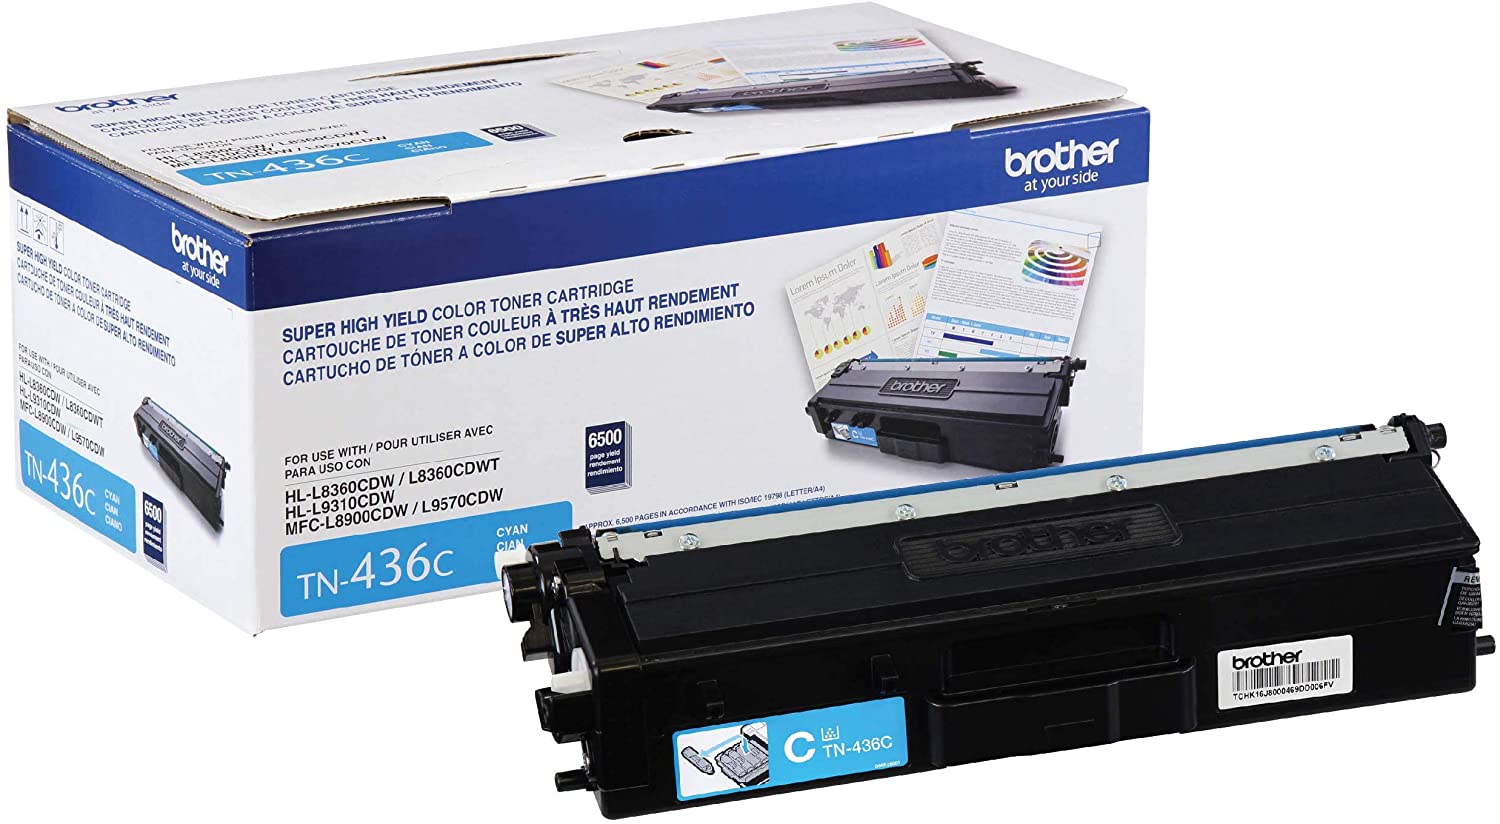 Absolute Toner Brother Genuine OEM TN-436C Super High Yield Cyan Toner Cartridge, Yield up to 6,500 pages Original Brother Cartridges